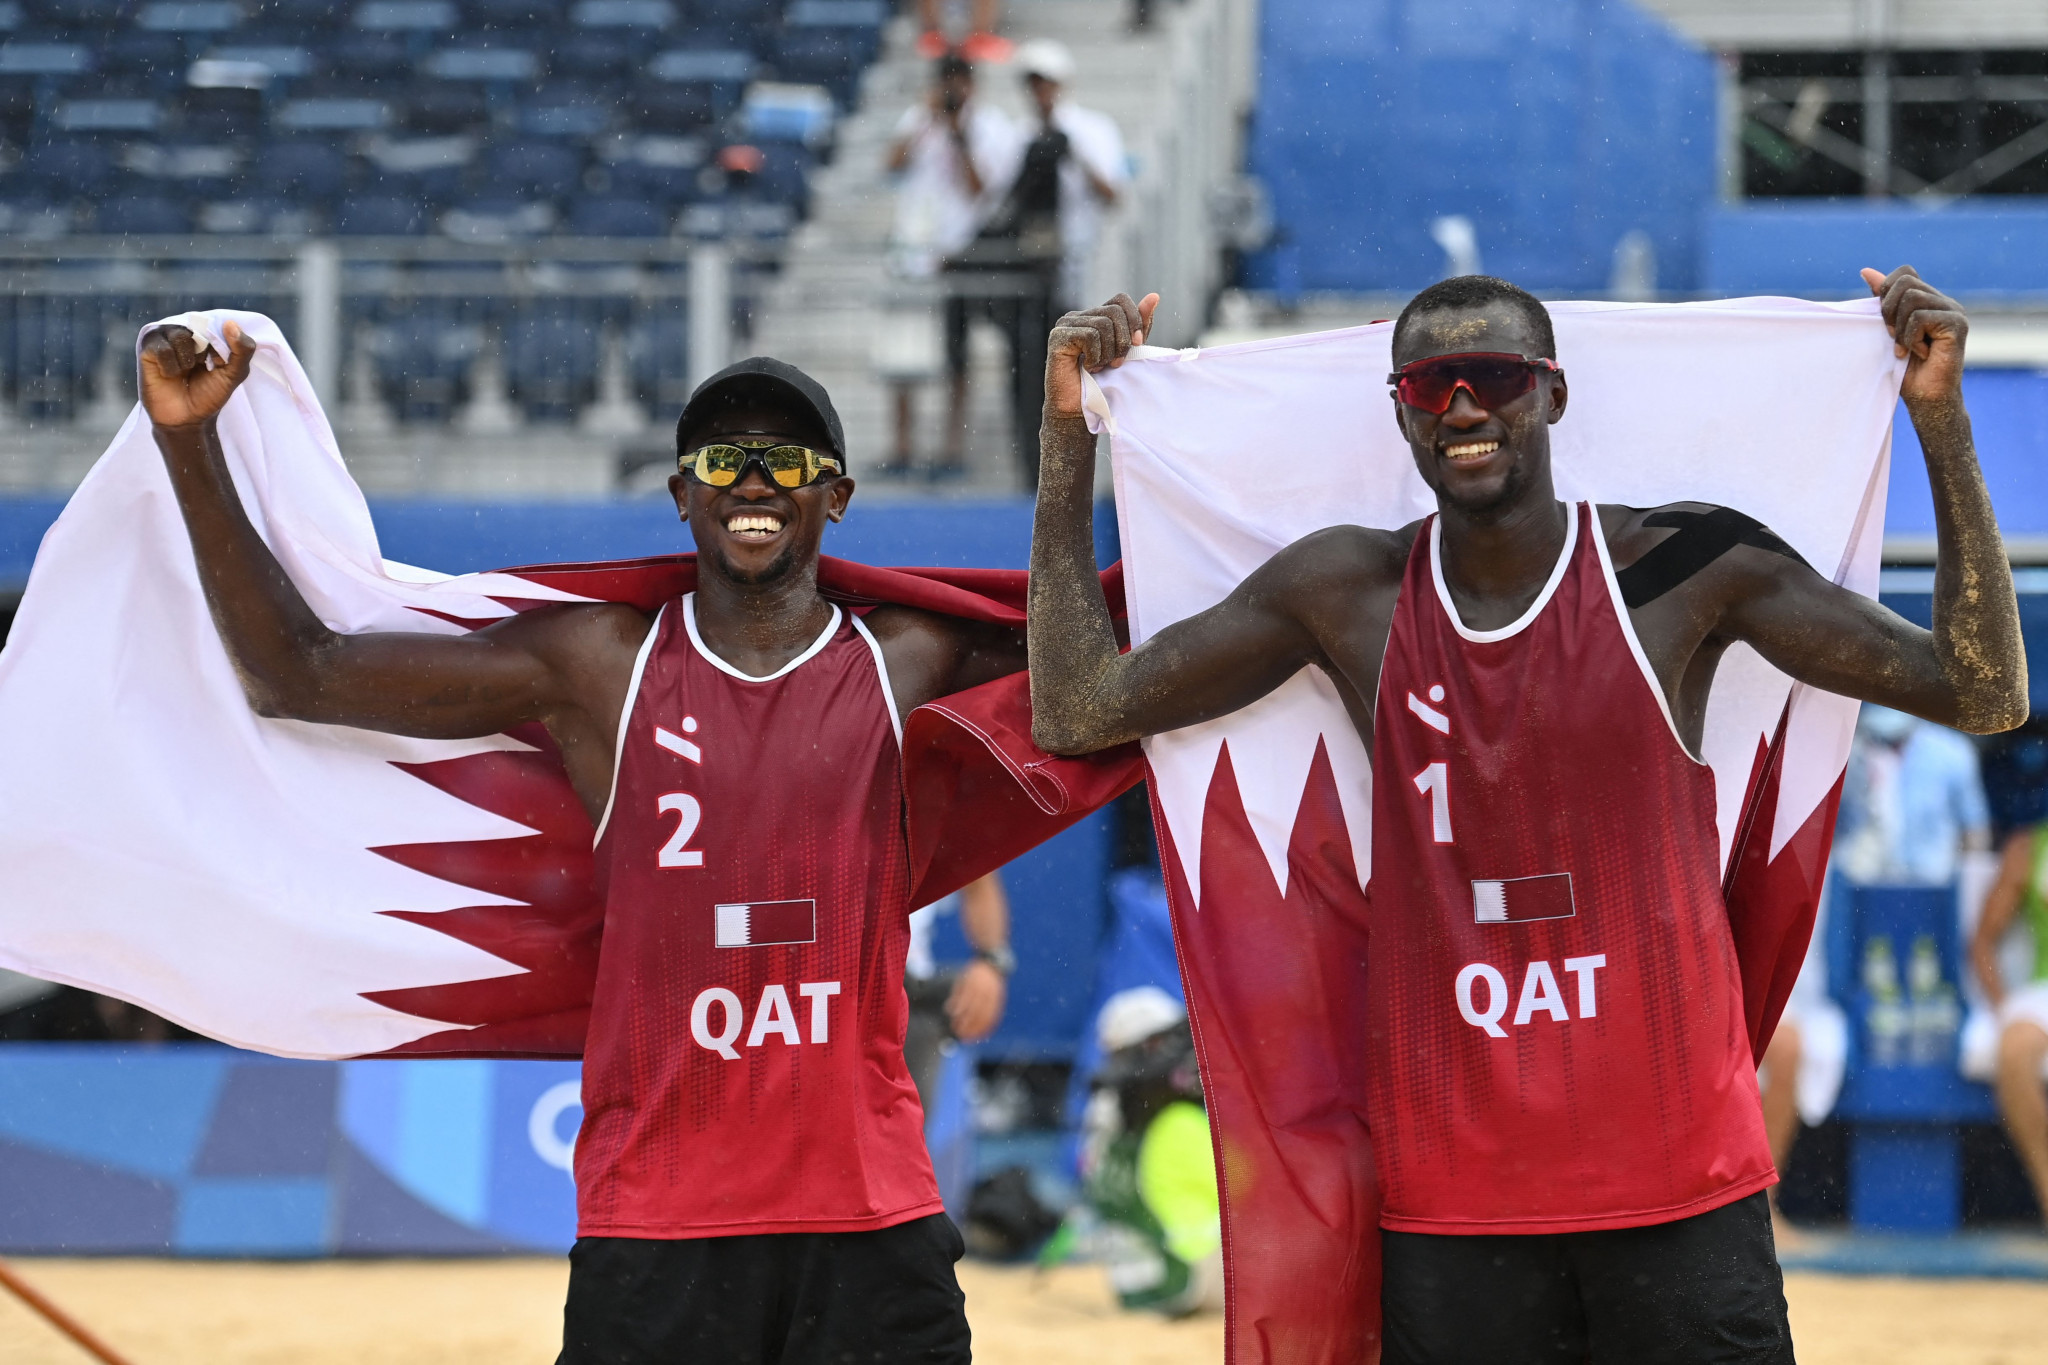 Cherif Younousse and Ahmed Tijan of Qatar will be aiming for success on home soil ©Getty Images